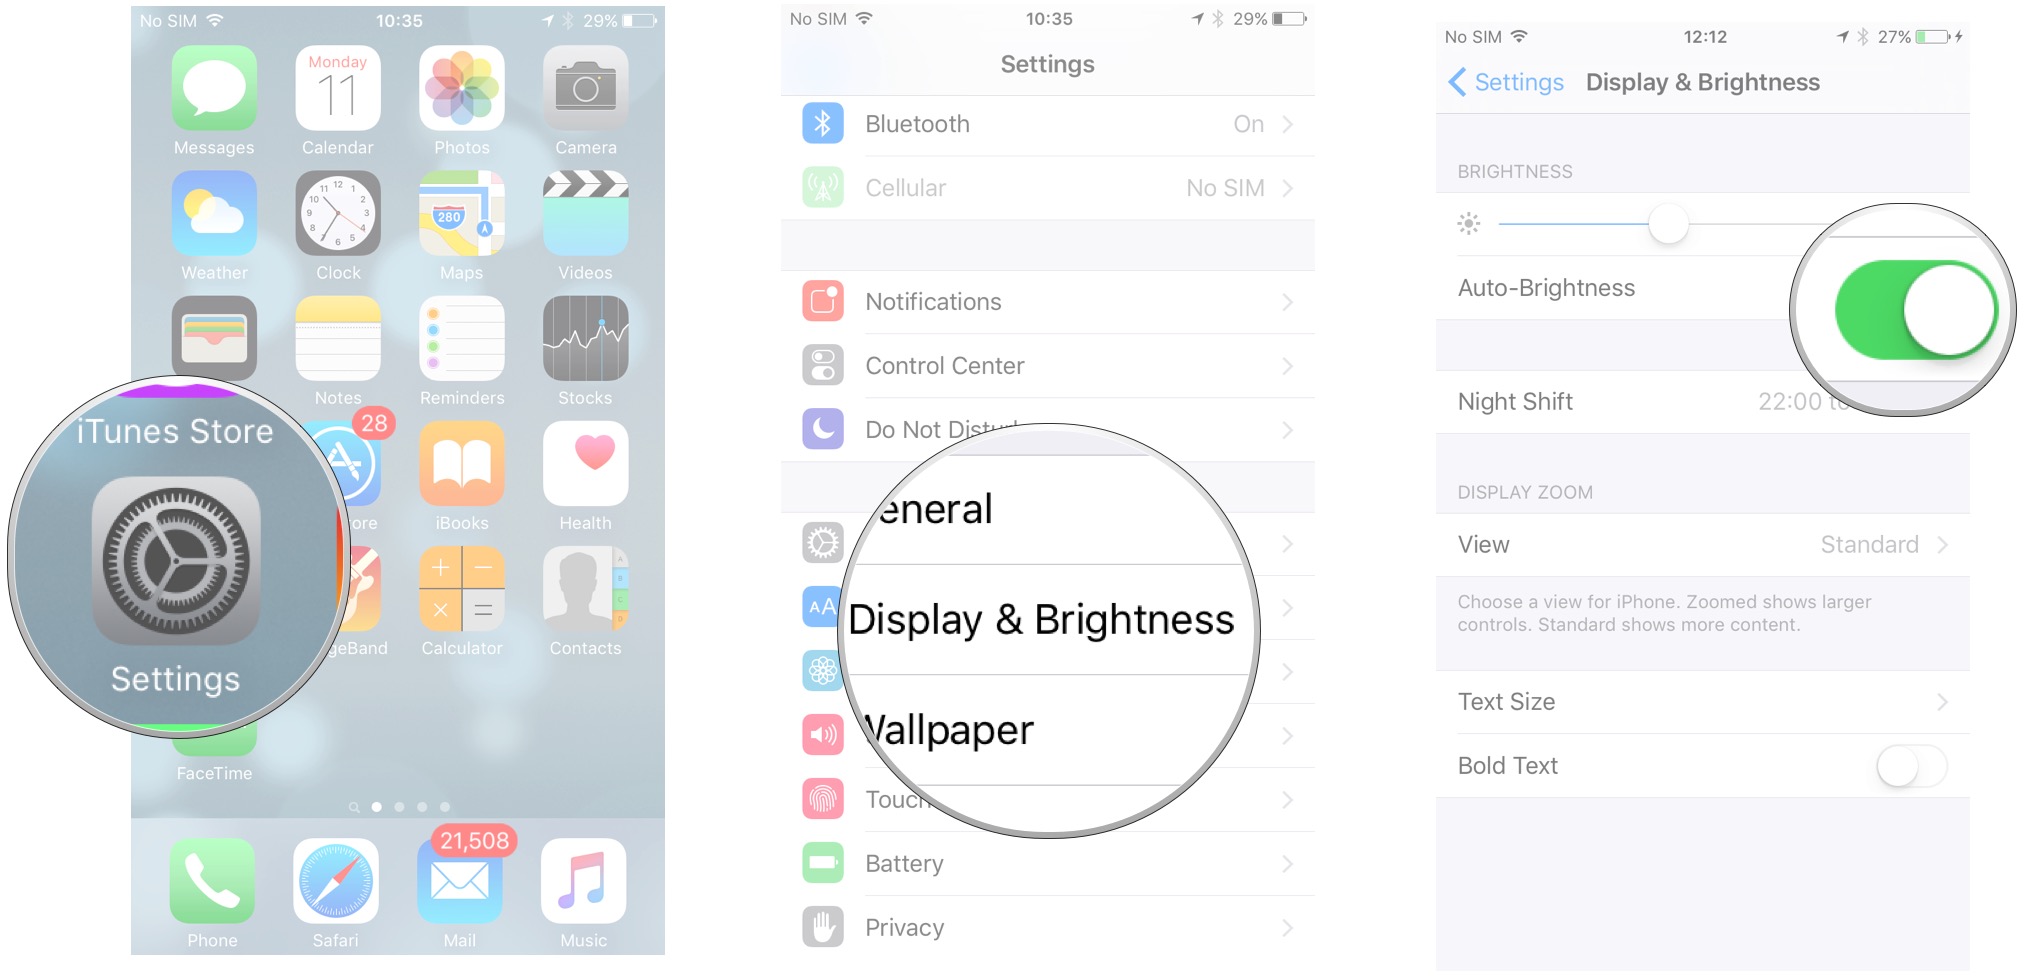 Open settings app, then tap display&brightness, then toggle auto-brightness on